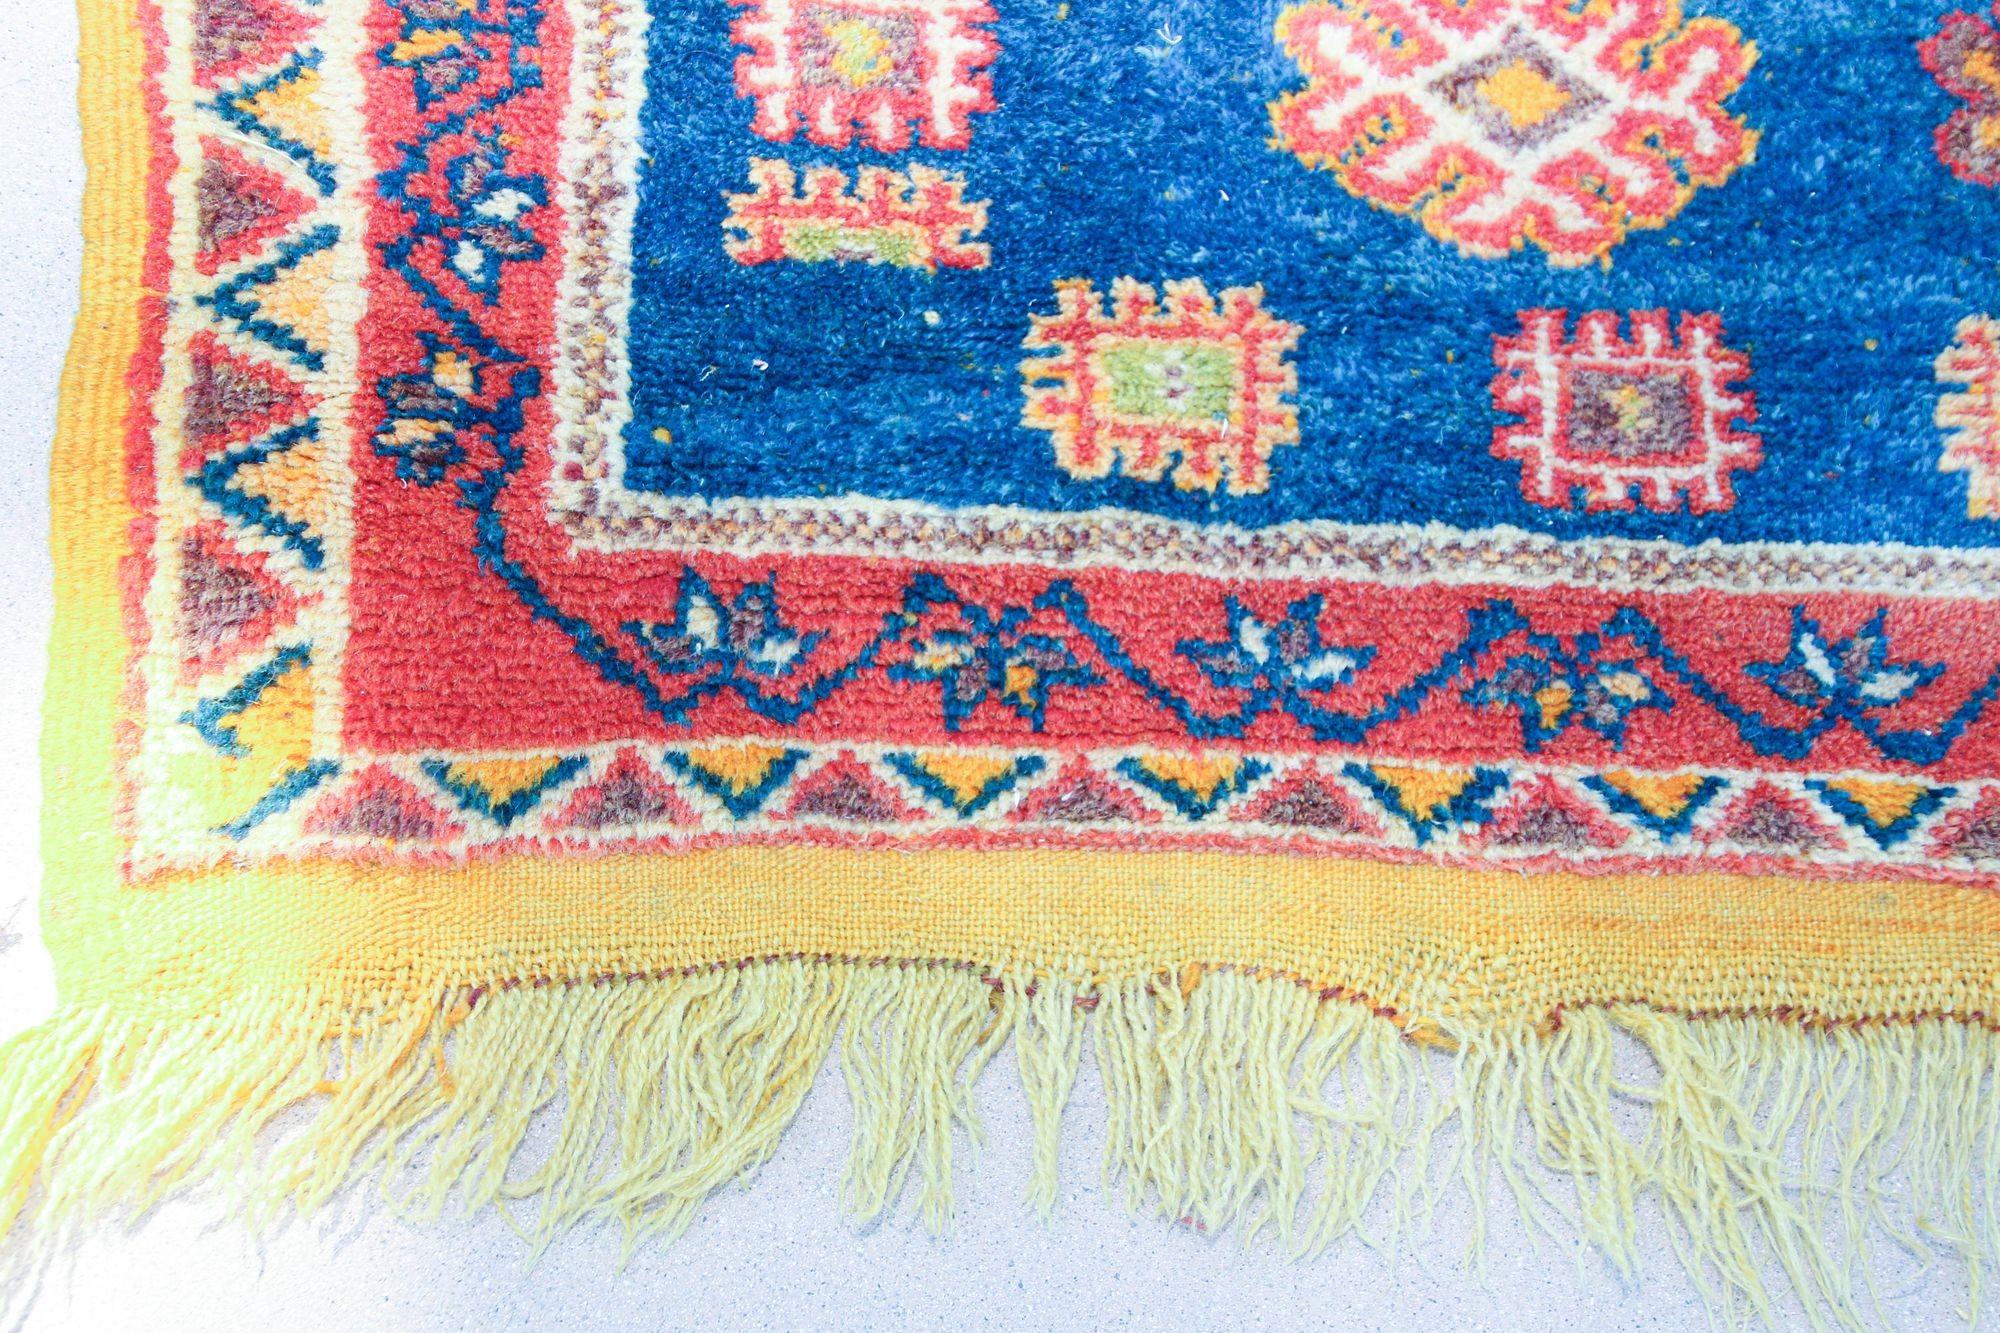 20th Century 1960s Moroccan Berber Rug in Royal Blue, Pink and Orange Colors For Sale